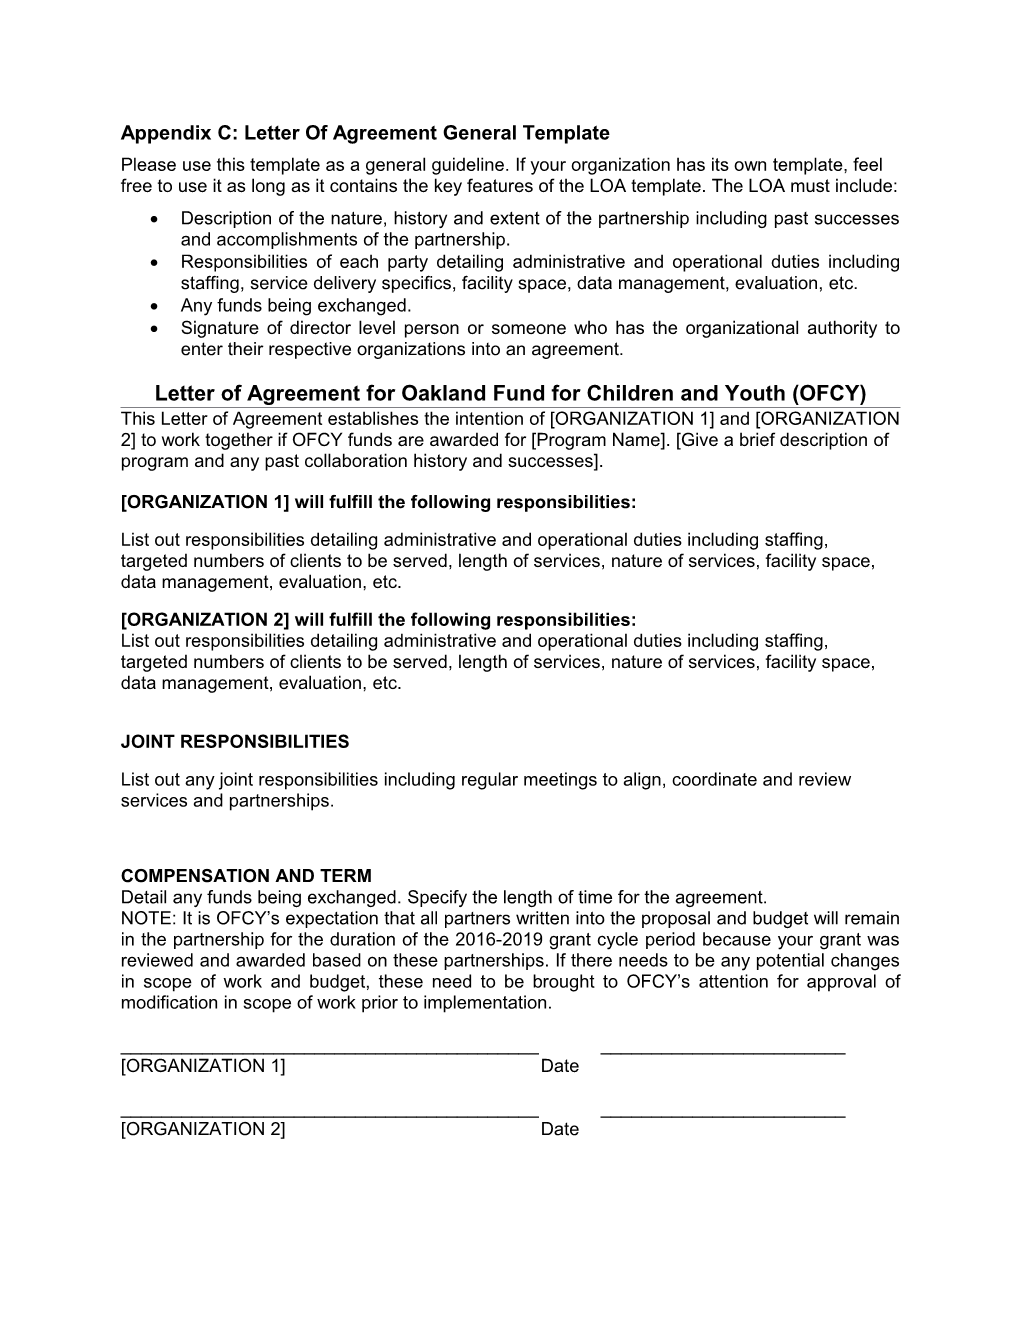 Appendix C: Letter of Agreement General Template